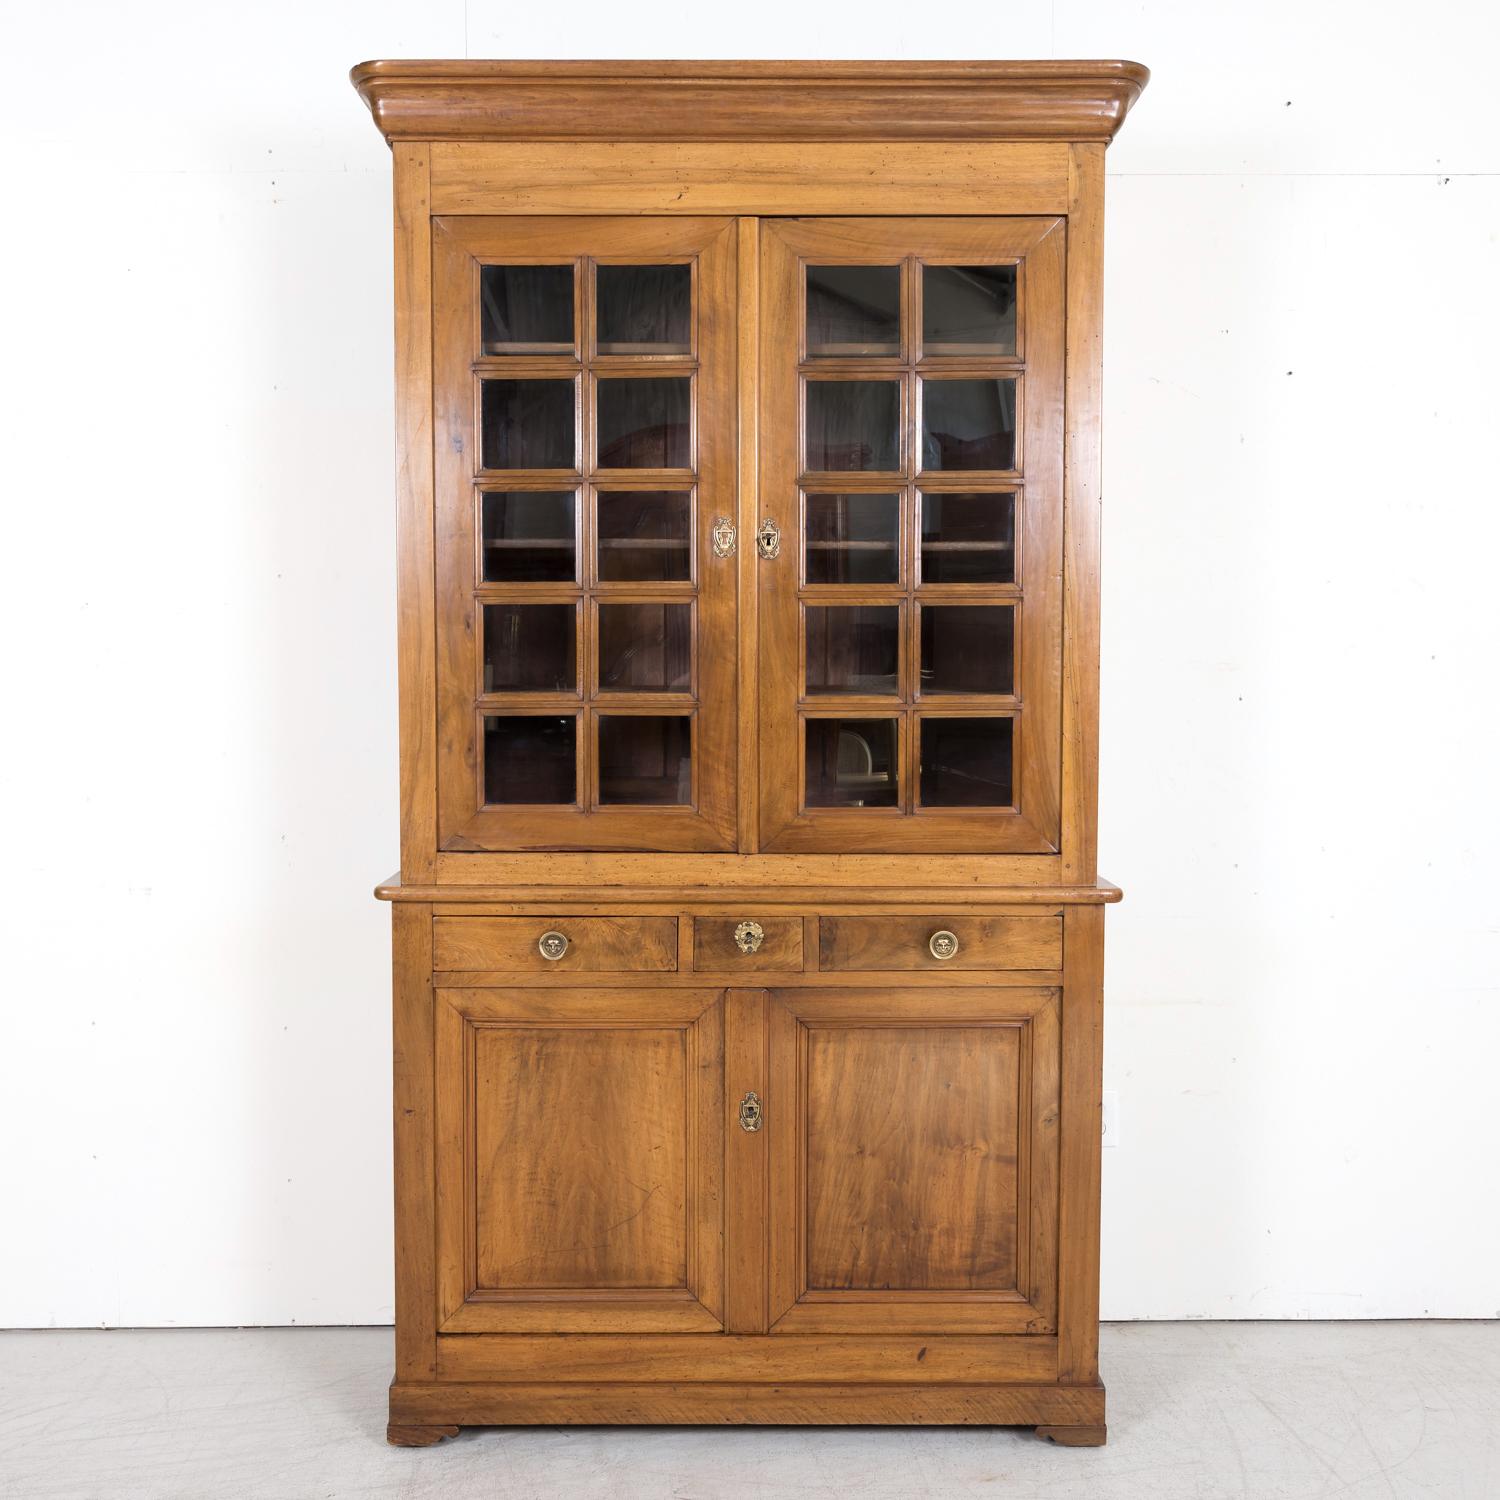 A mid-19th century French Louis Philippe period buffet à deux corps or bibliothèque handcrafted of walnut by talented artisans near the city of Arles, a UNESCO World Heritage site because of its abundance of Roman and Romanesque architecture, circa